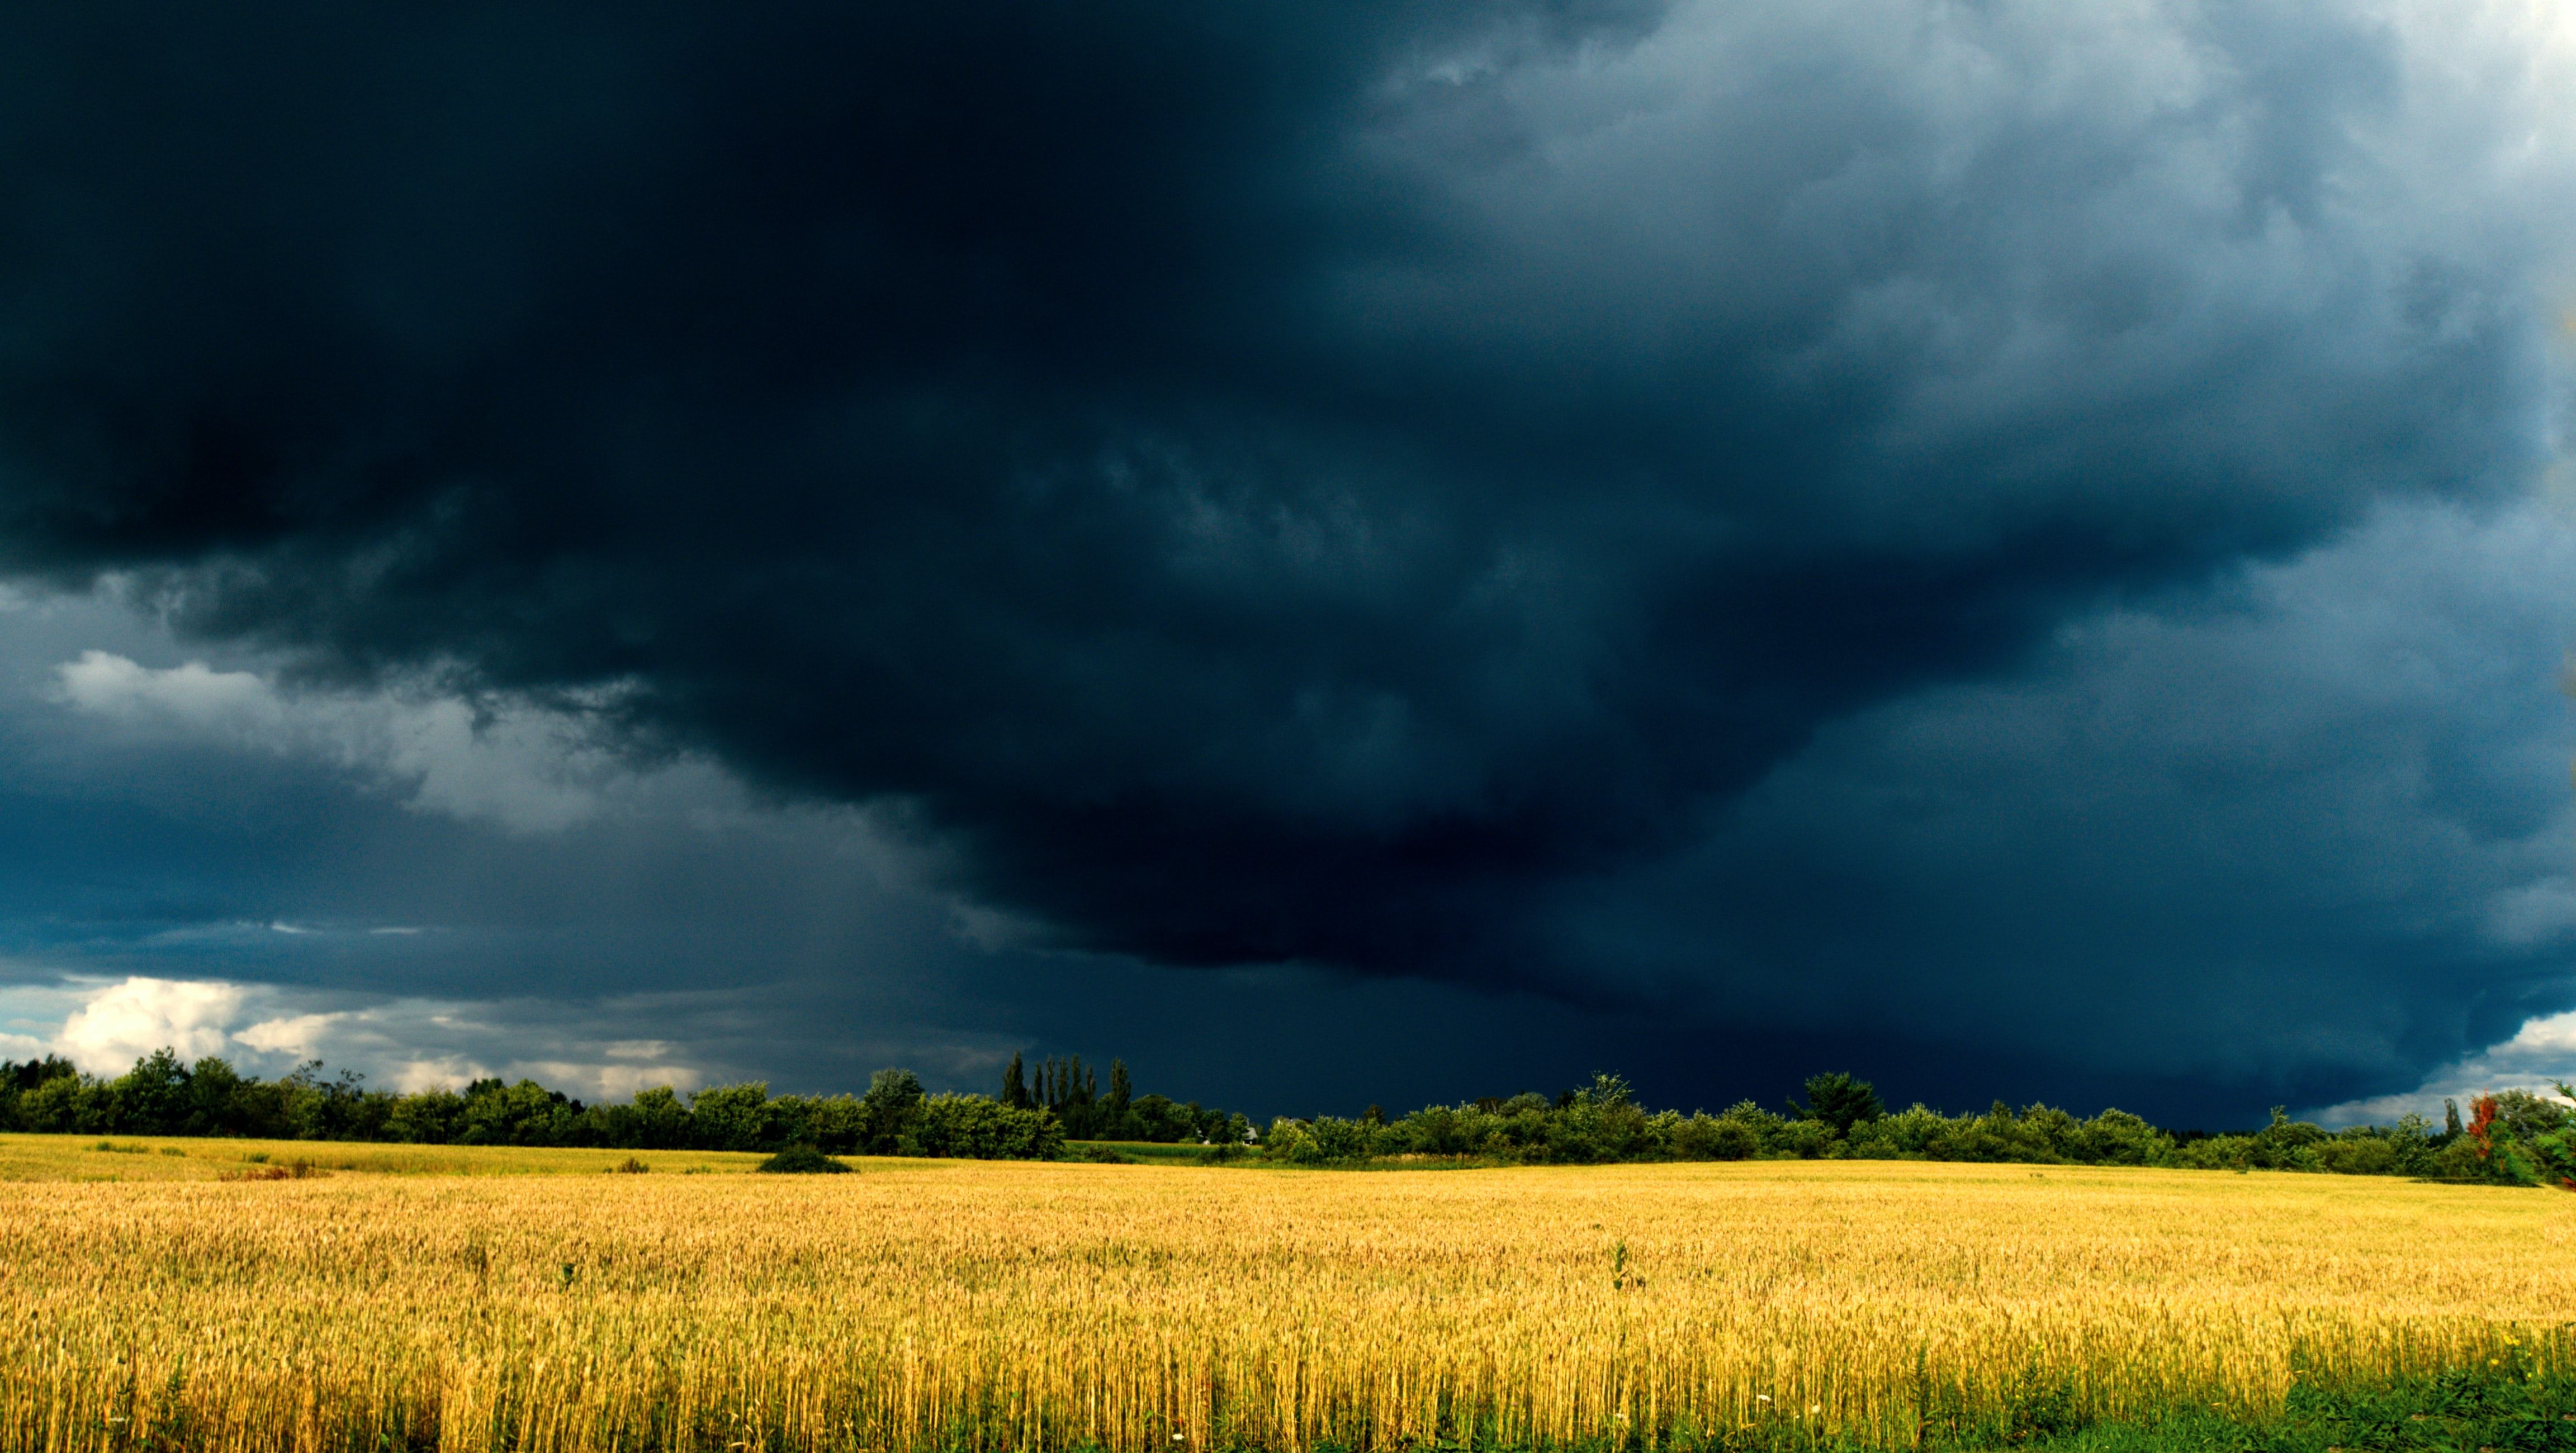 A tornado developing in a storm as dark clouds hover over a farming field 